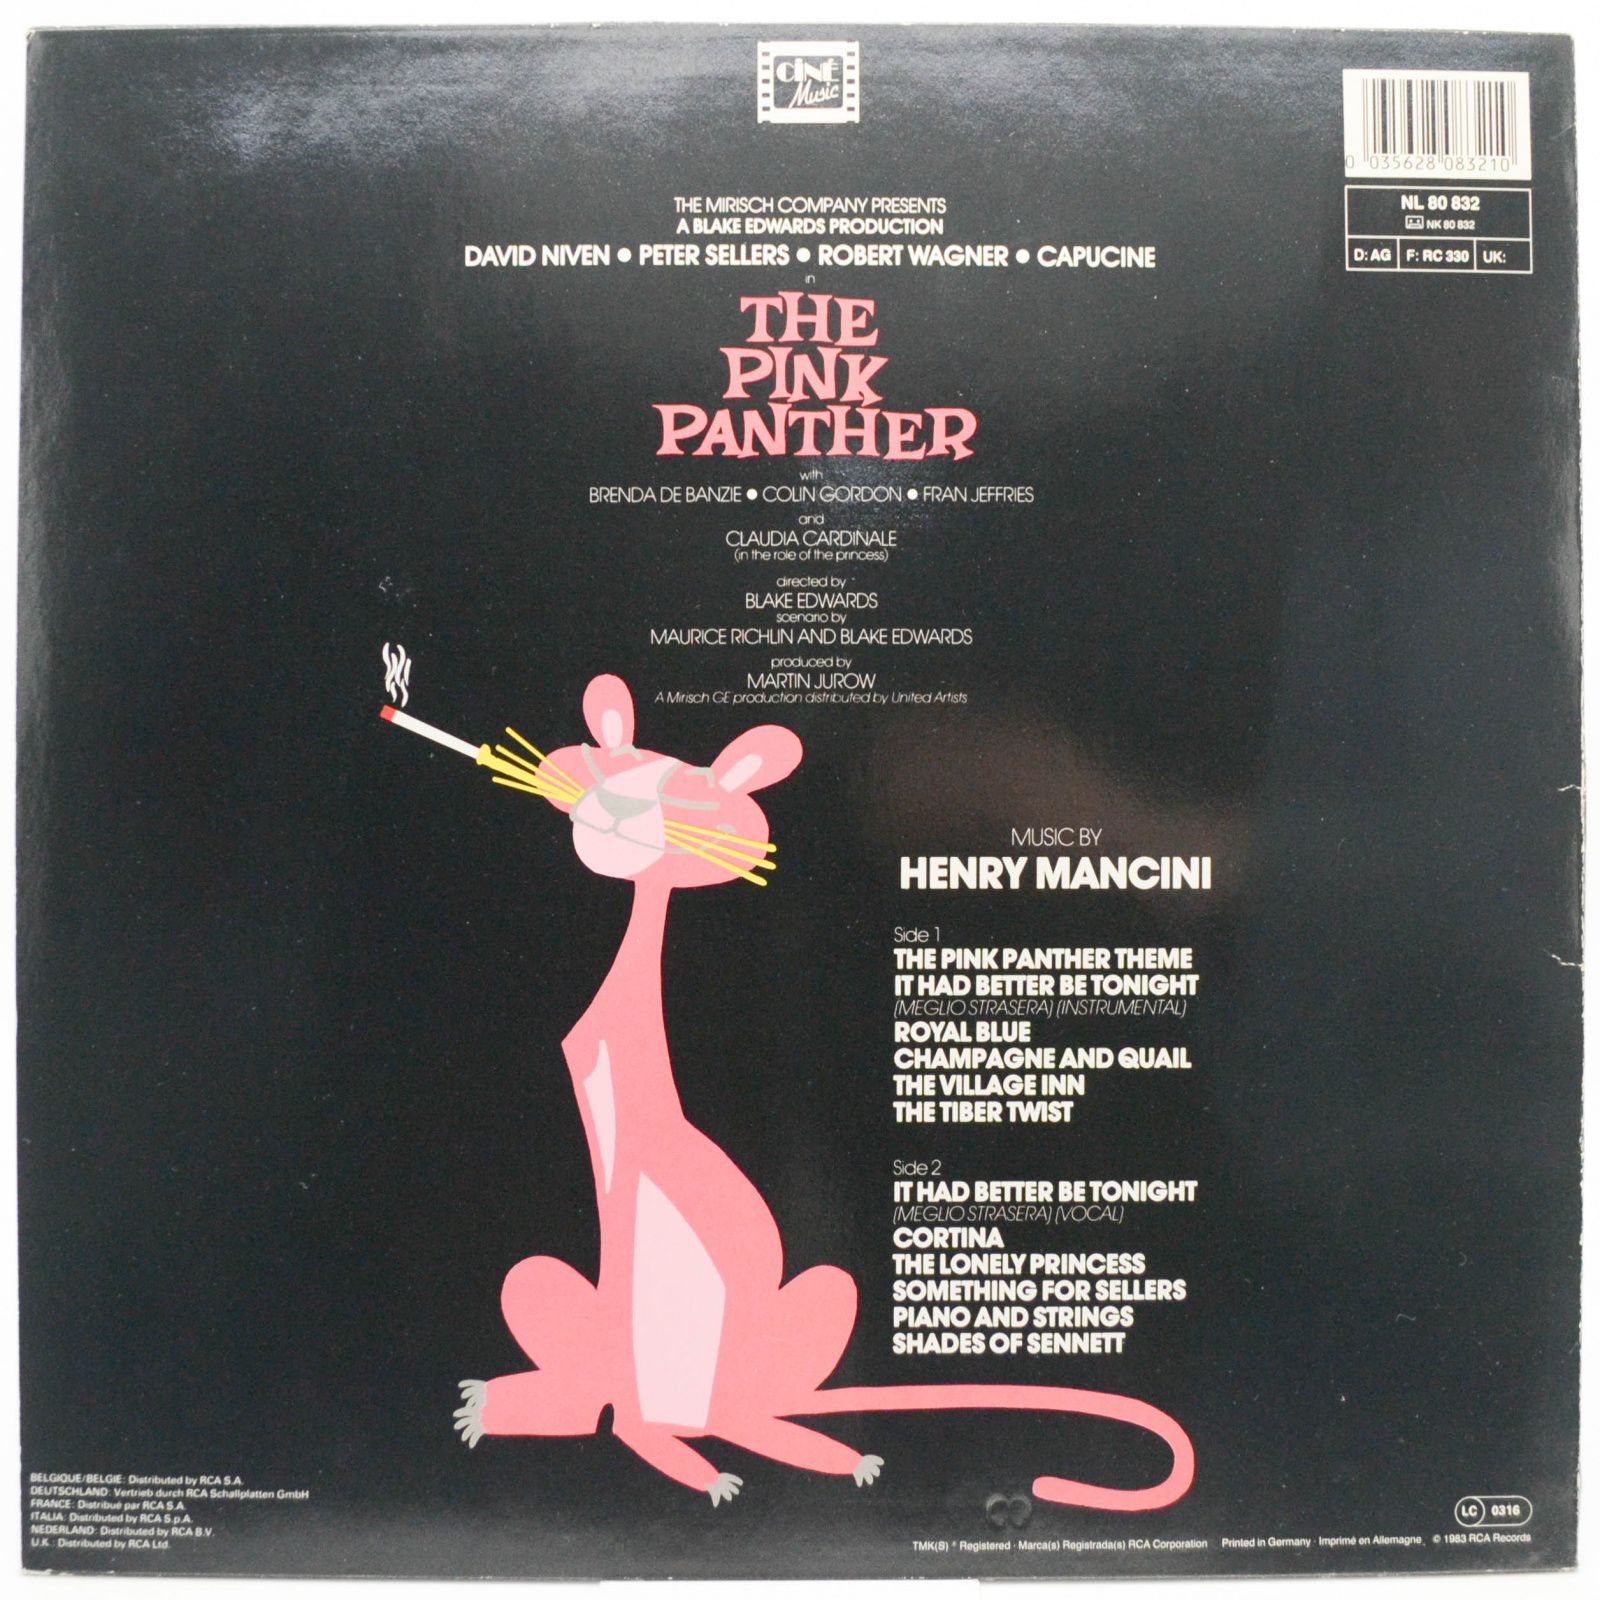 Henry Mancini — The Pink Panther, 1963